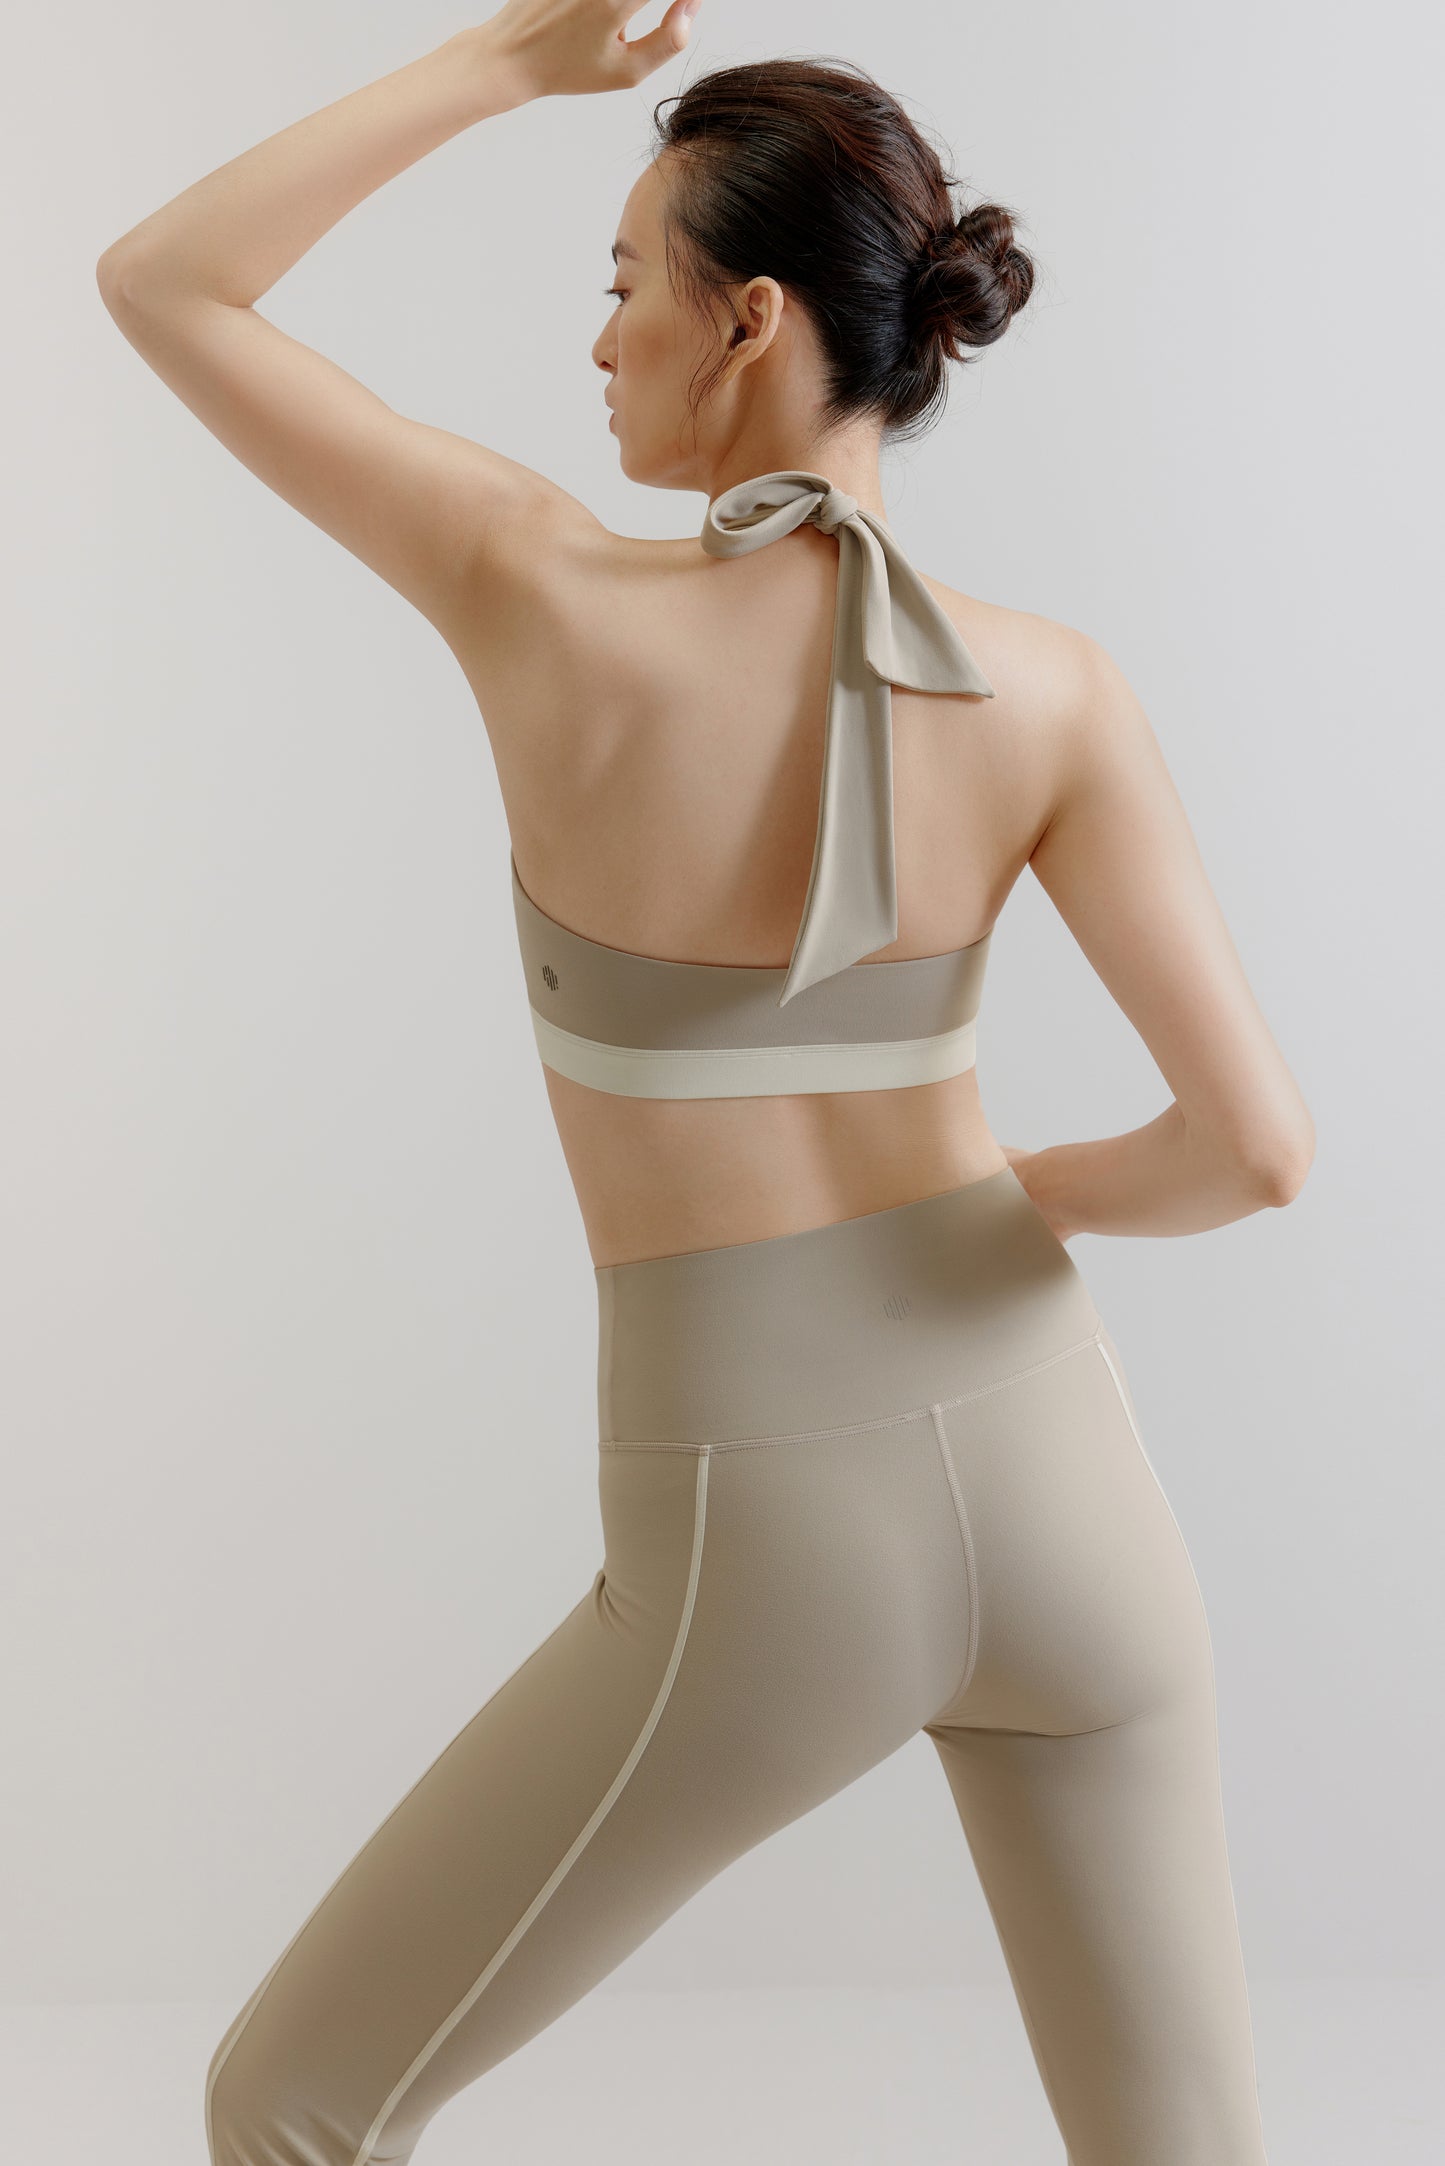 A woman wears a gray sports bra and leggings from back.